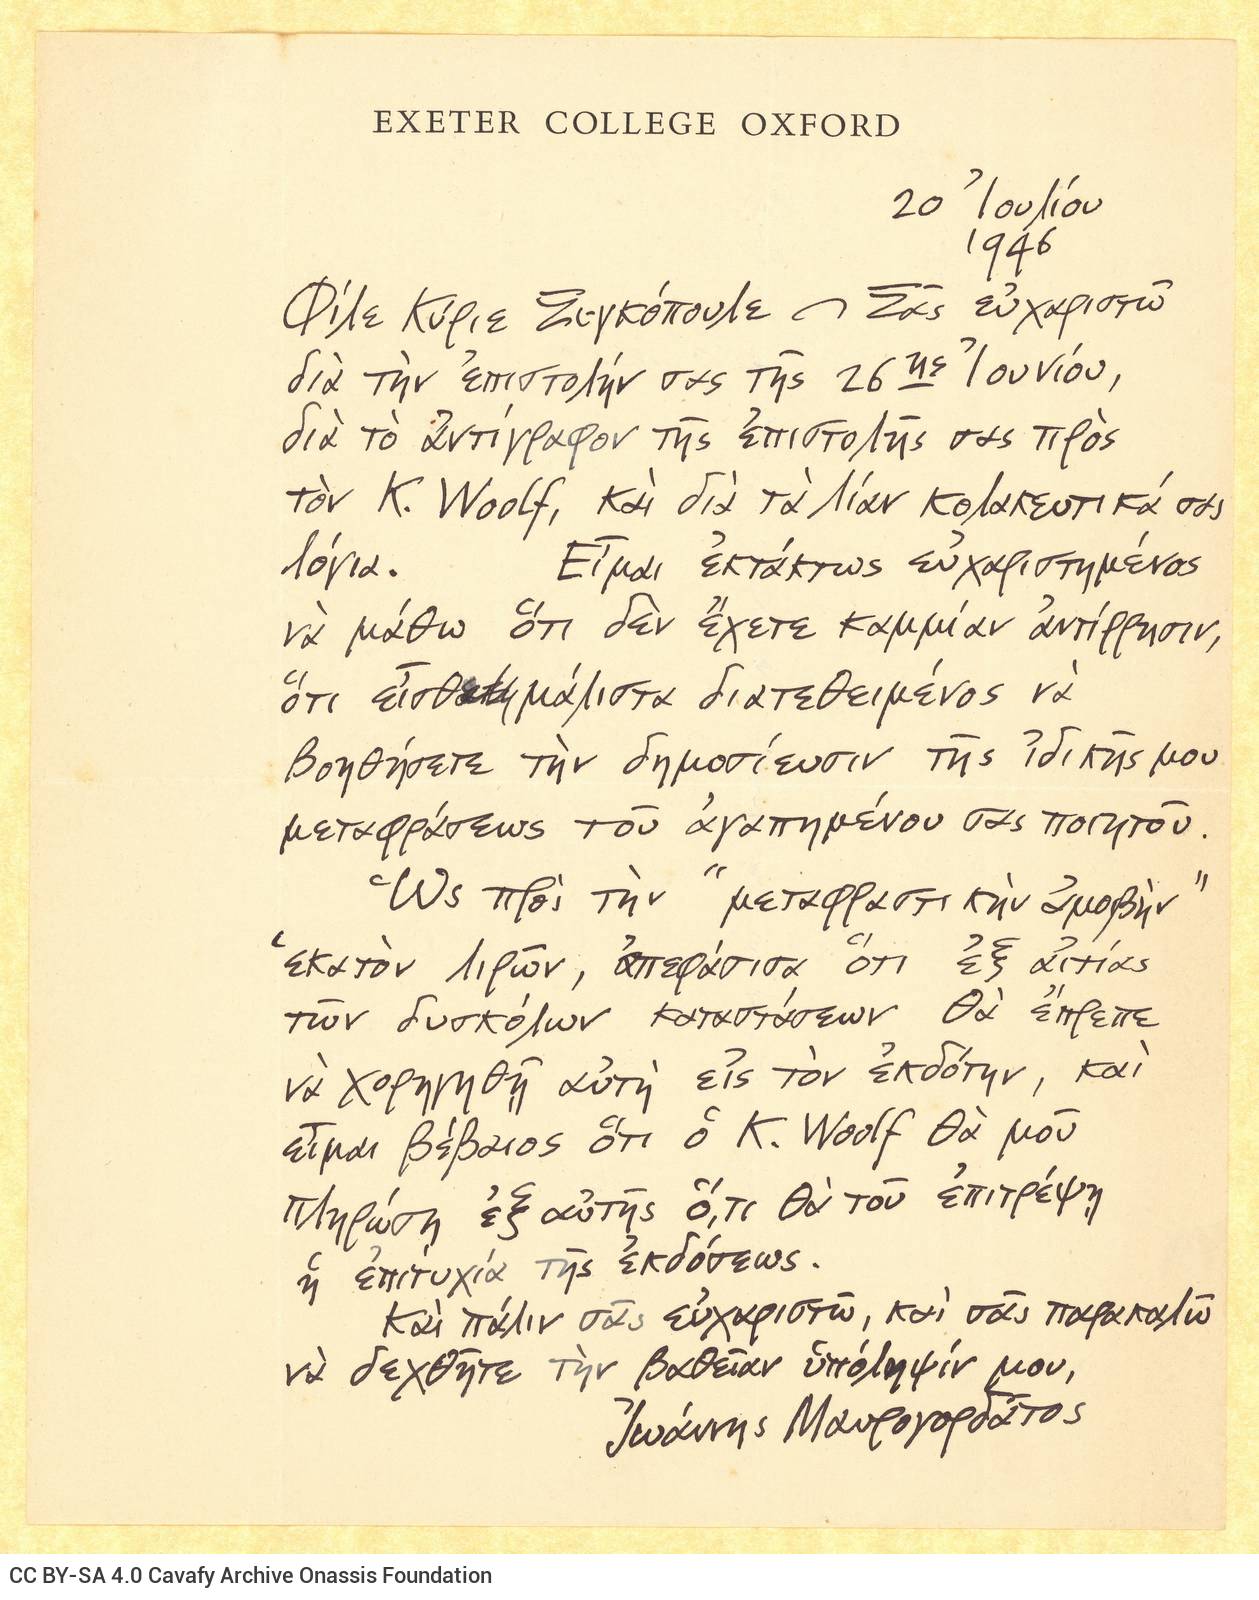 Handwritten letter by Ioannis Mavrogordatos to Alekos Singopoulo on one side of a letterhead of Exeter College, Oxford, where